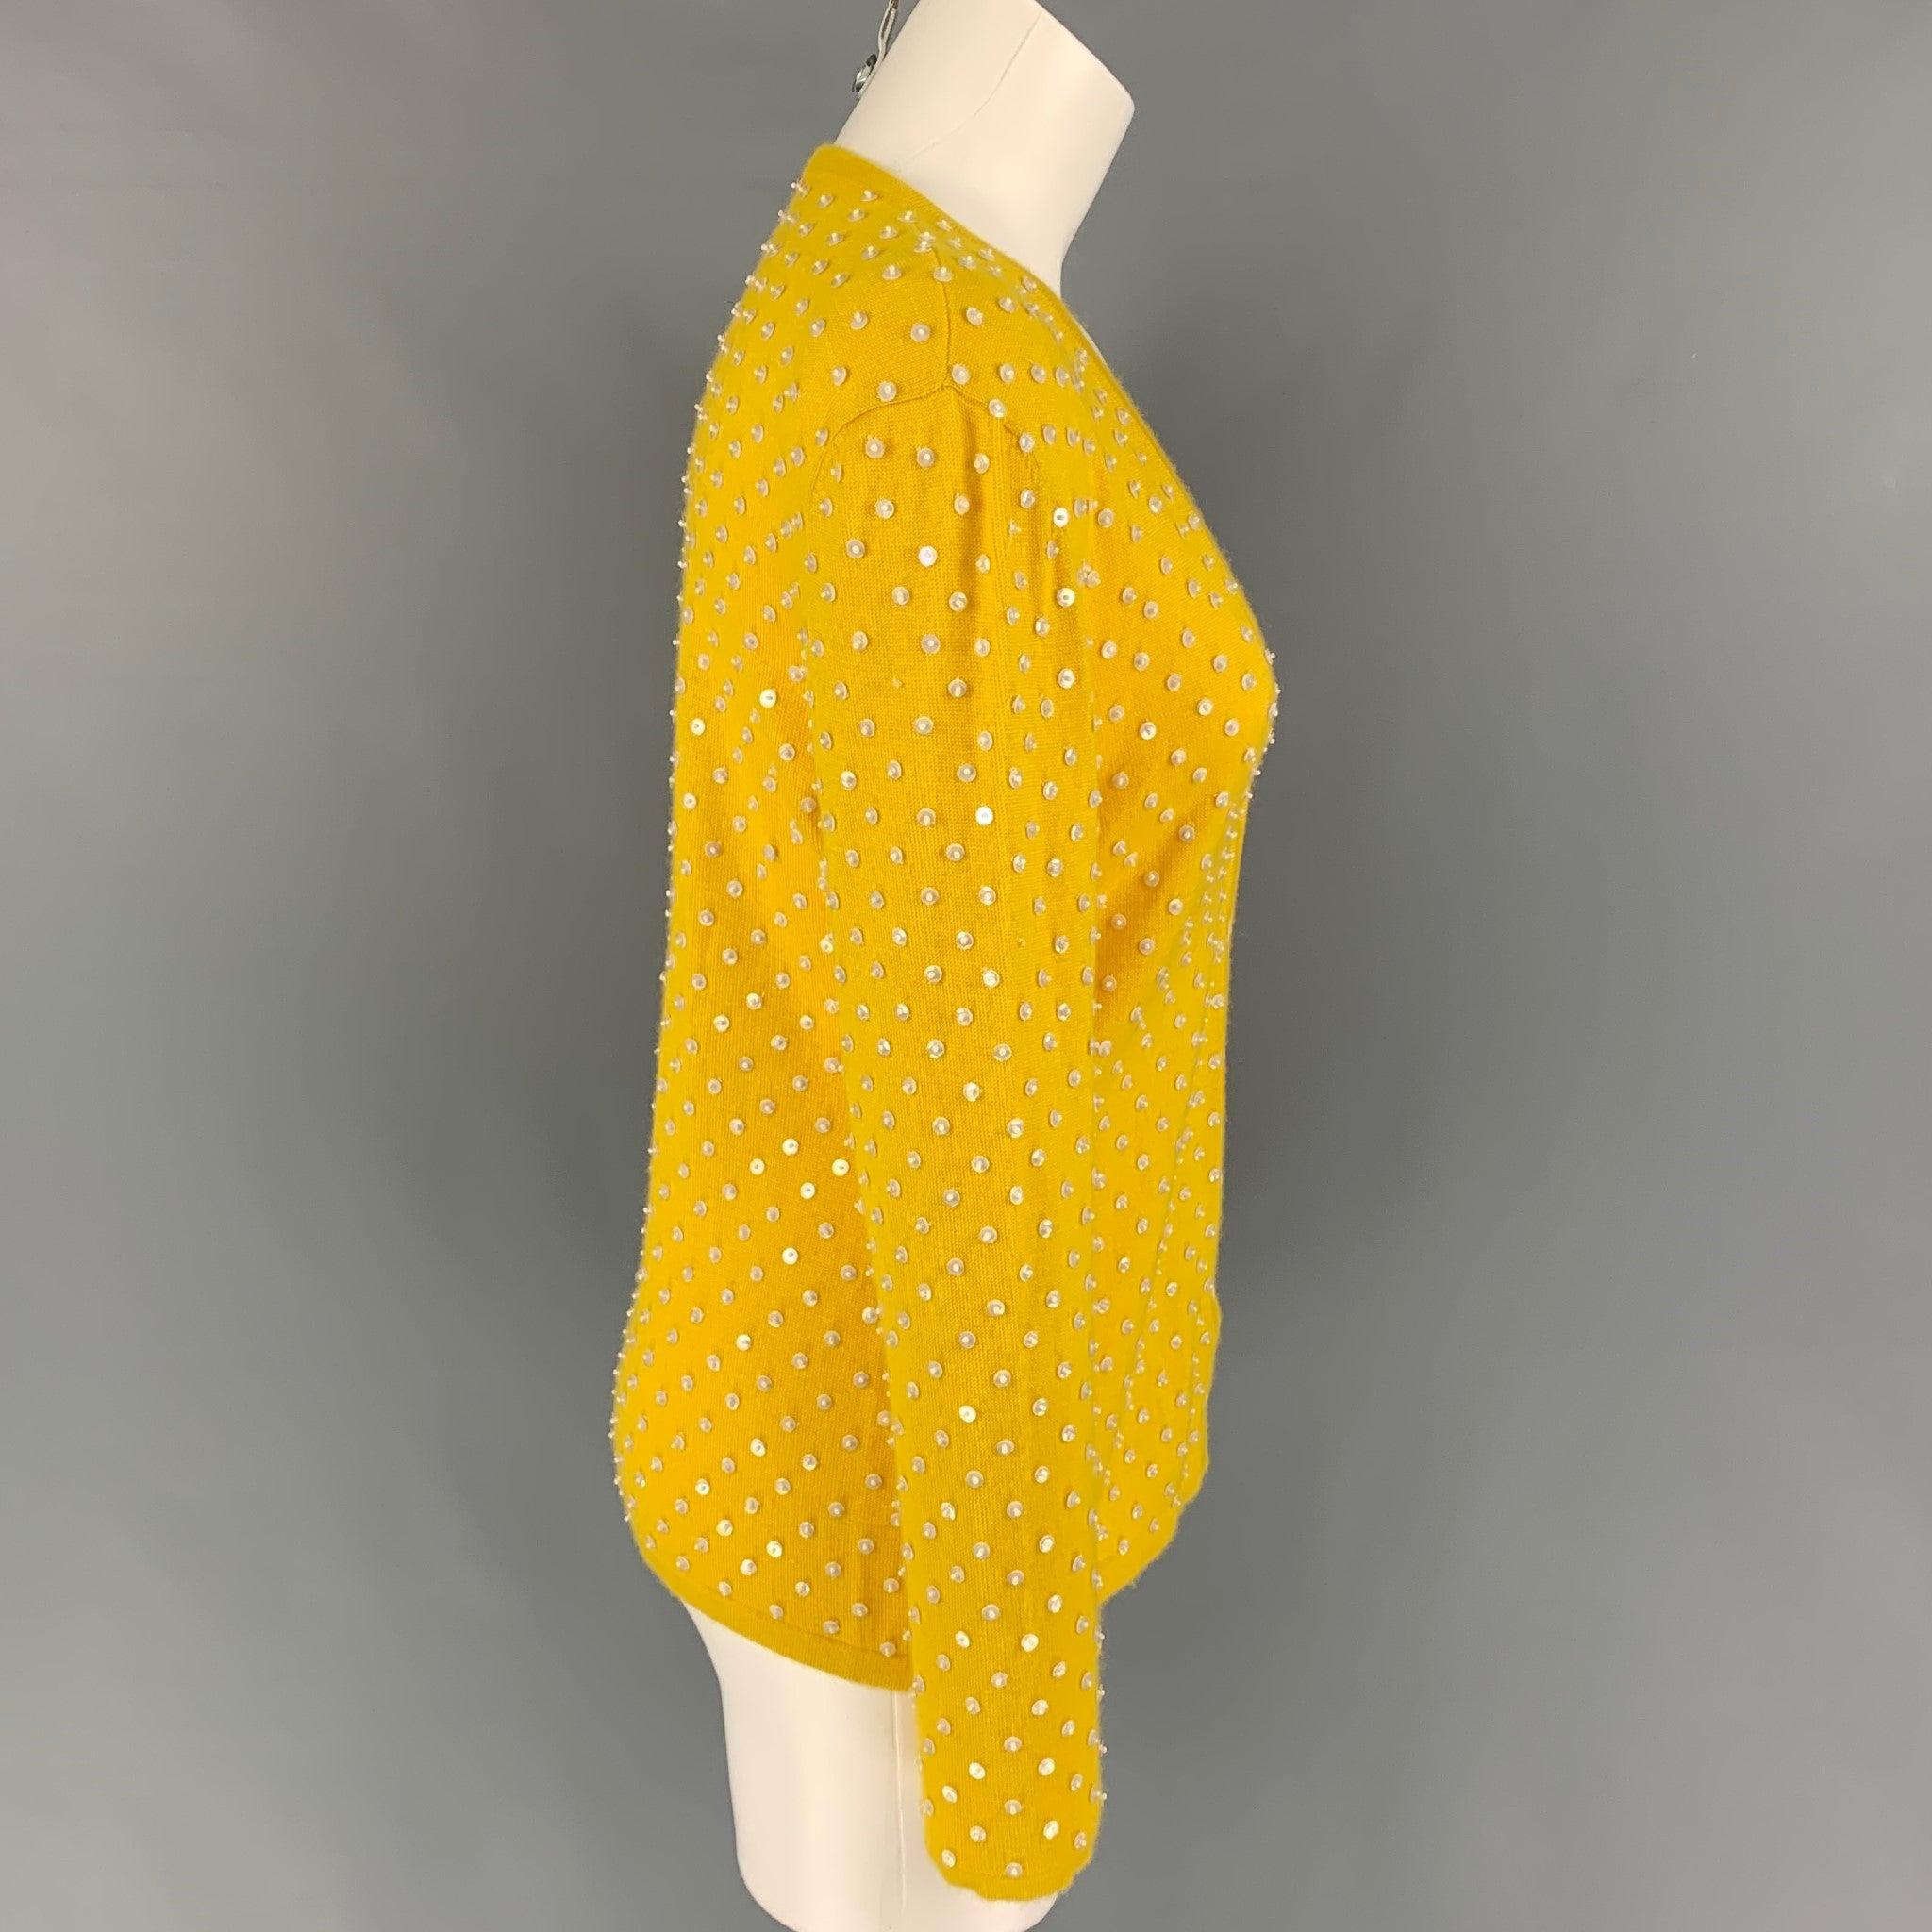 OSCAR DE LA RENTA cardigan comes in a yellow cashmere featuring beaded embellishments and a buttoned closure. Matching sleeveless pullover sold separately.
Very Good
Pre-Owned Condition. Logo & Fabric tag removed.  

Marked:   M  

Measurements: 
